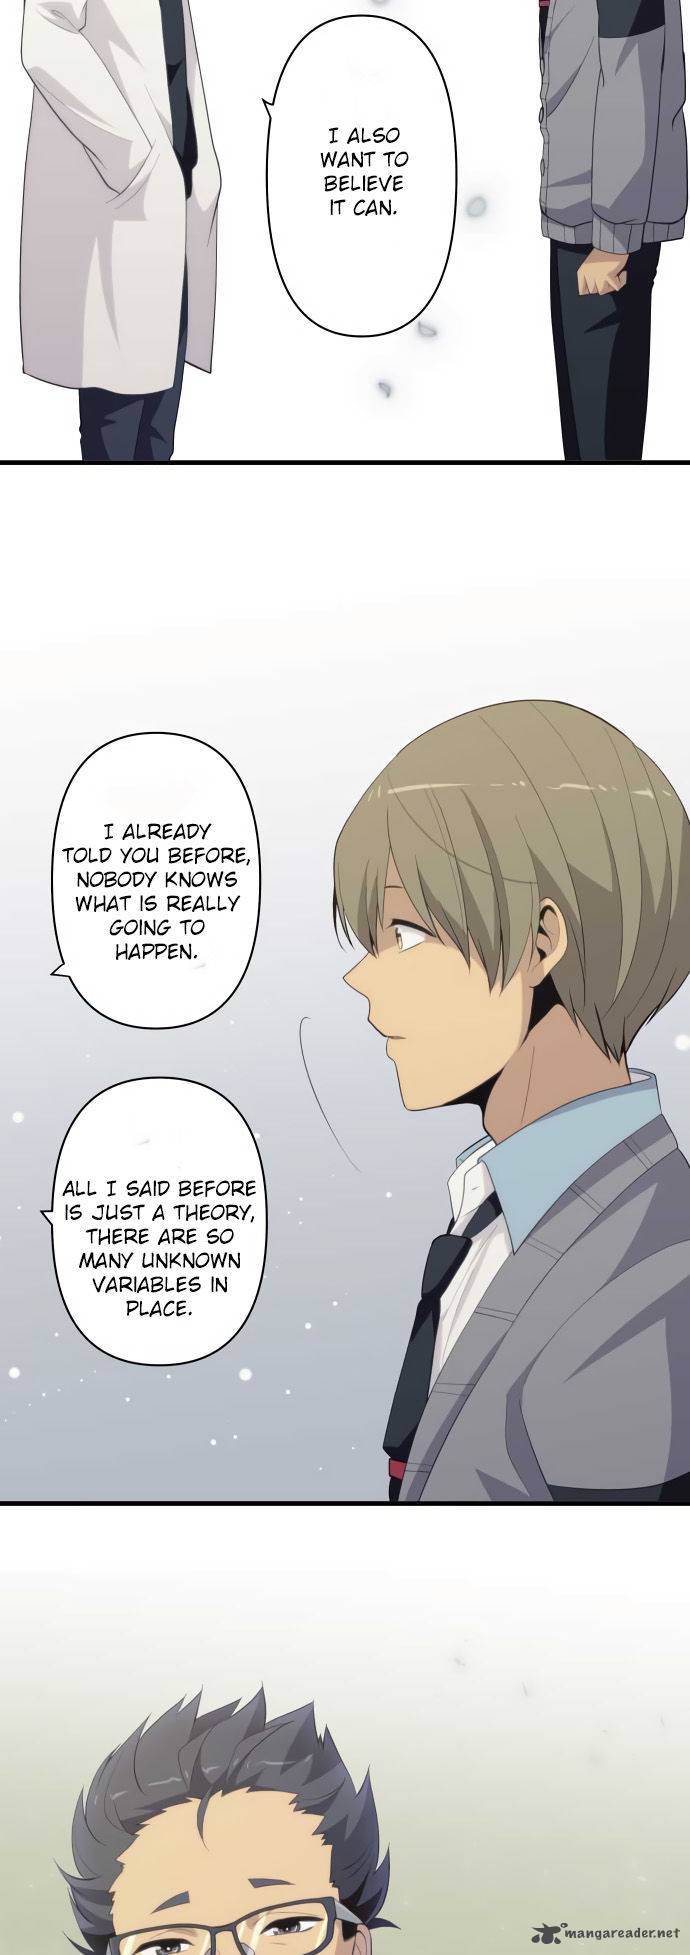 Relife 204 14